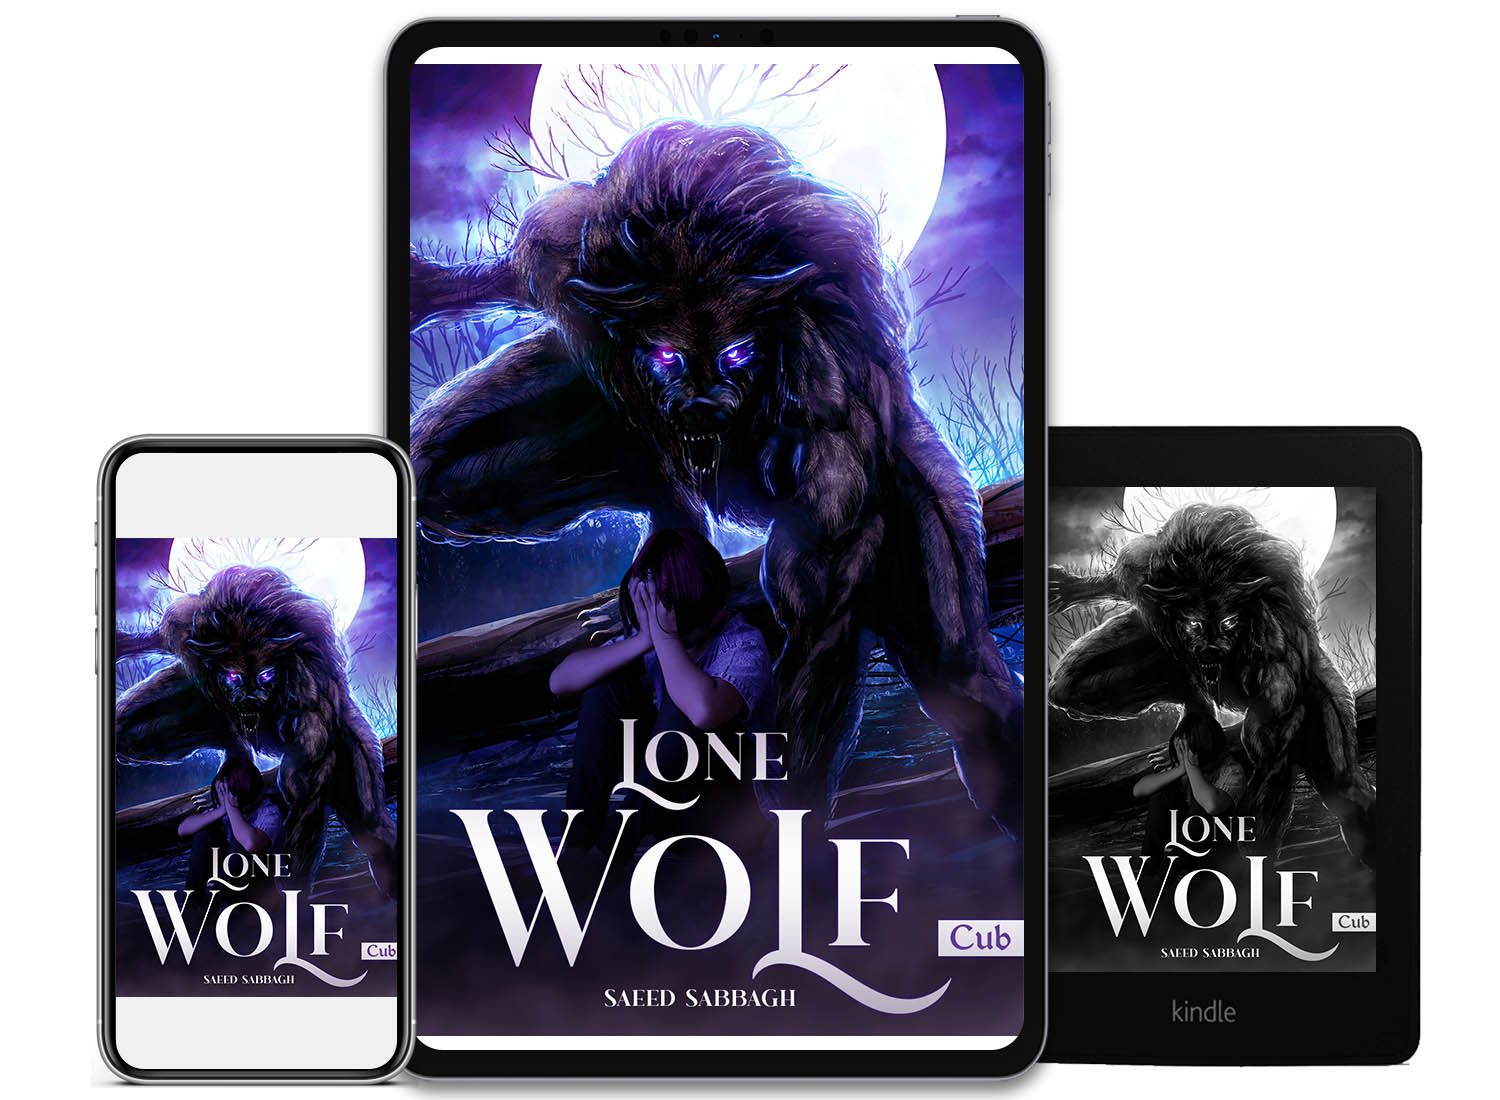 bookconsilio-bookcover-lone-wolf-saeed-sabbagh-ebookcoverdesign-